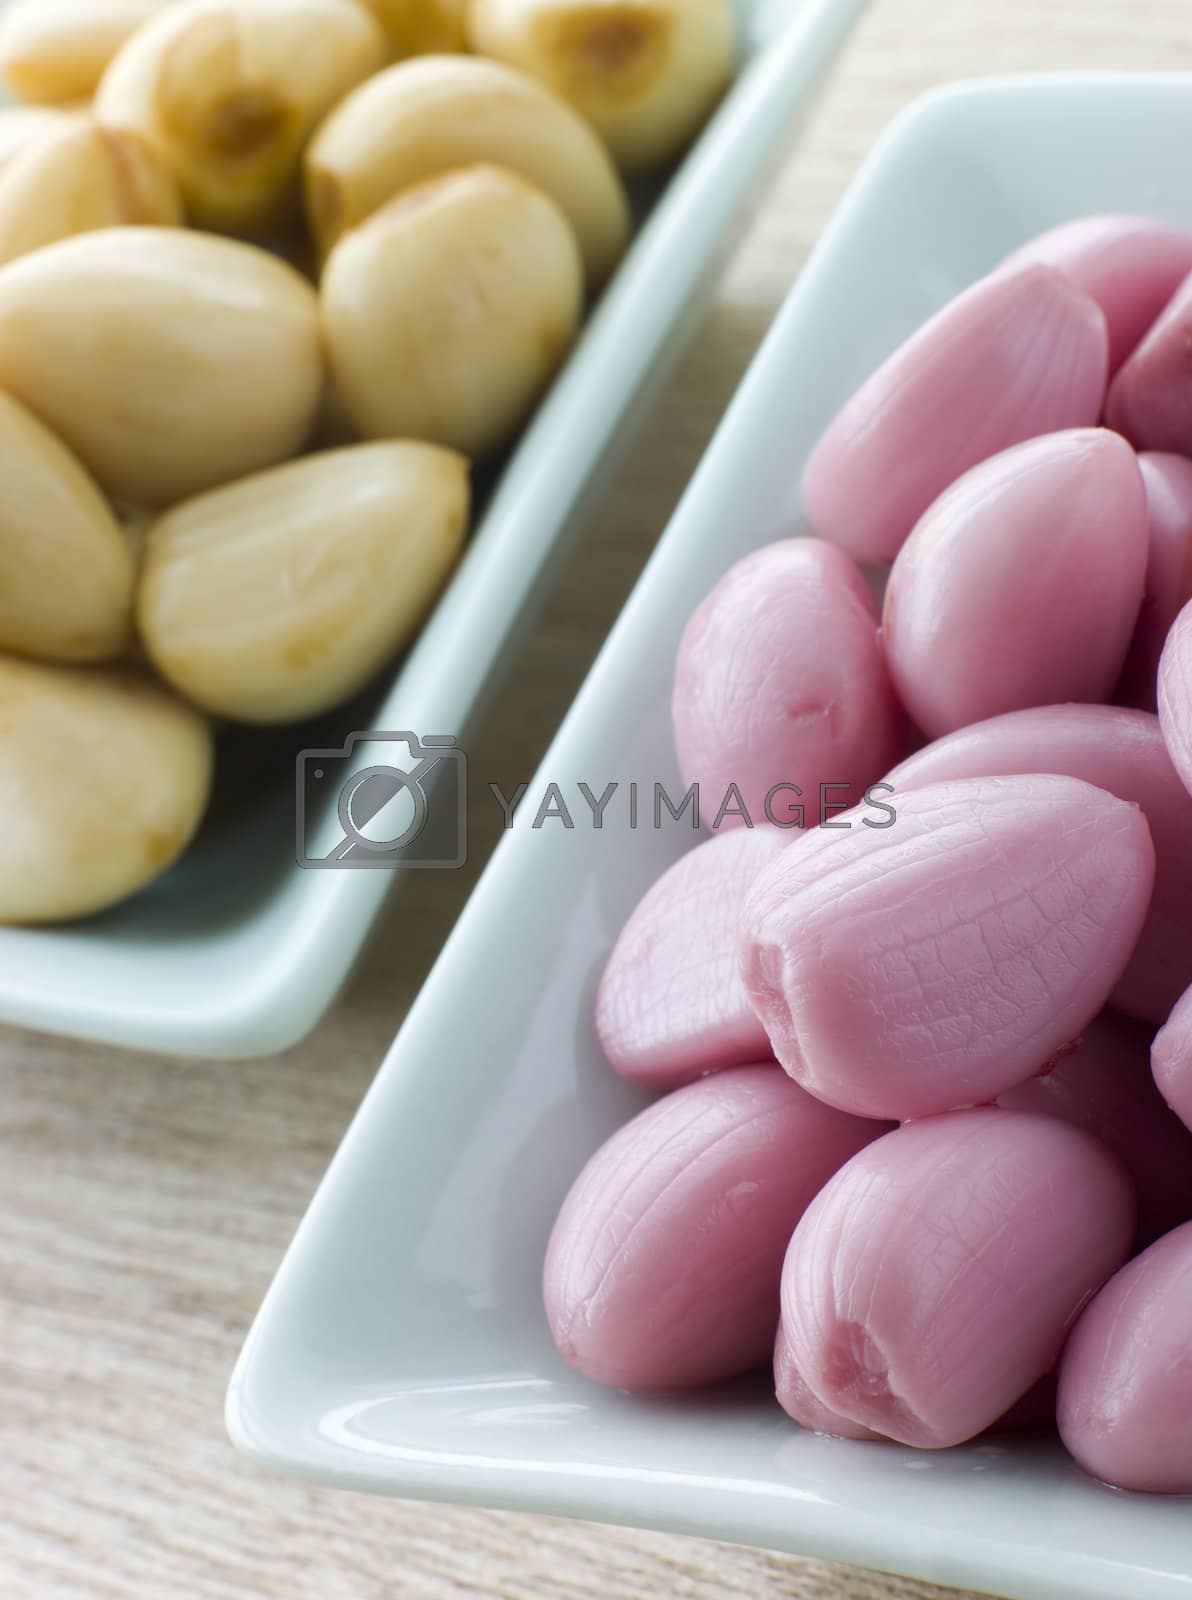 Royalty free image of Dishes of Pickled Garlic by MonkeyBusiness